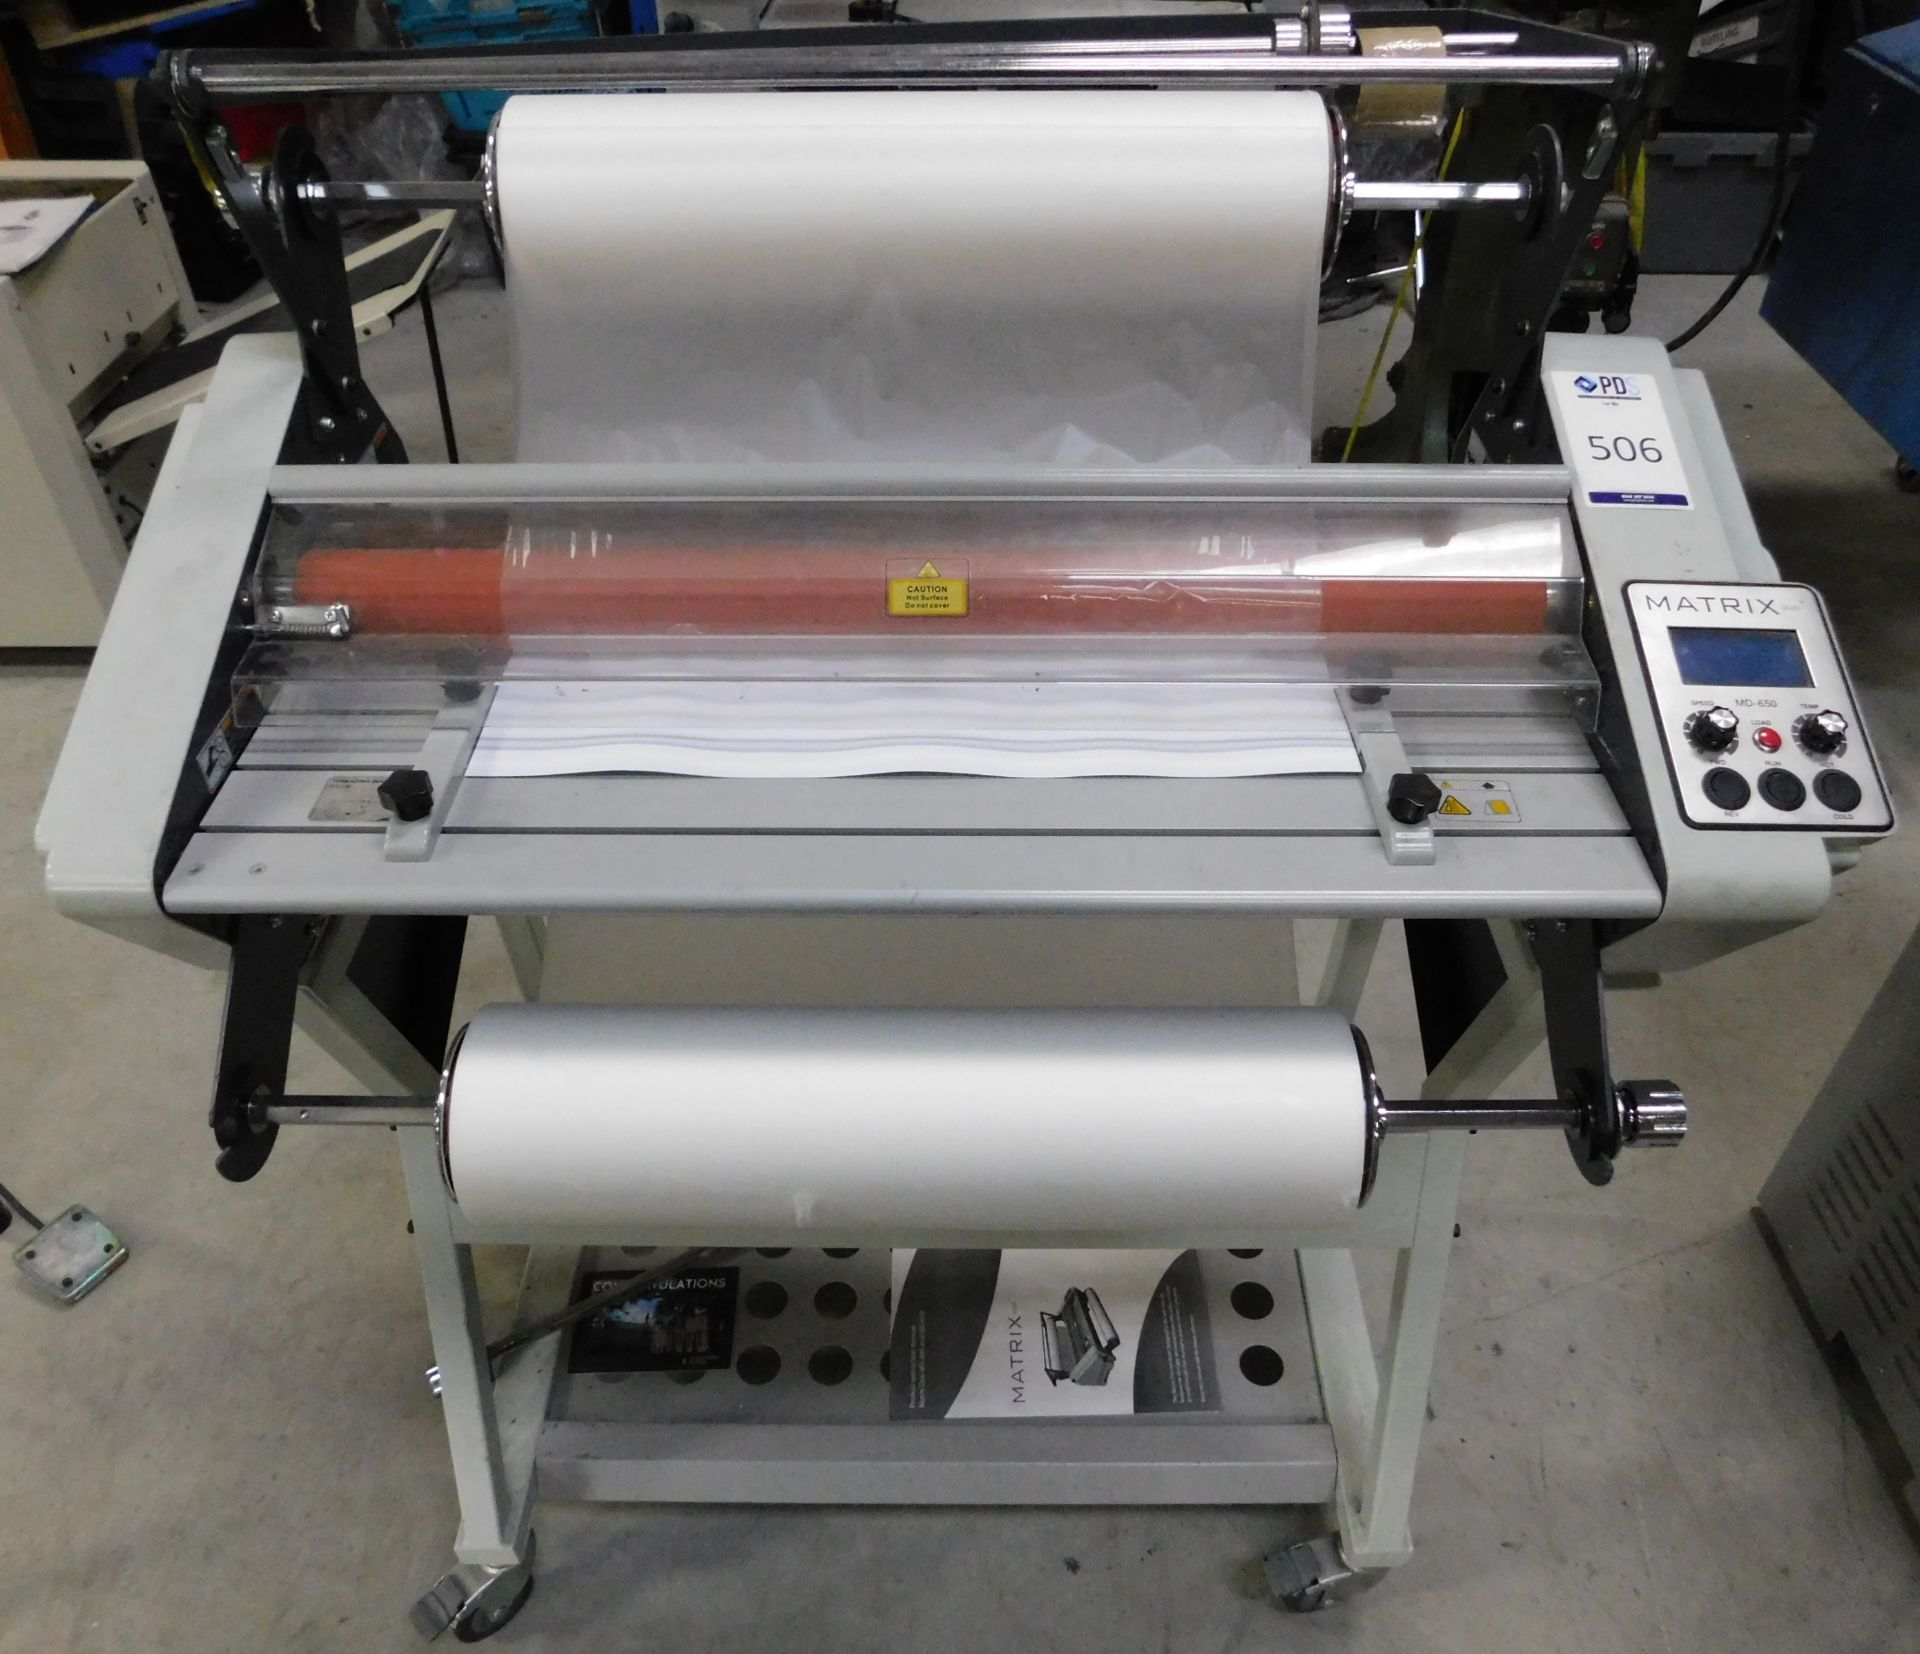 Matrix DUC MD650 Roll Laminator (Location Brentwood. Please Refer to General Notes)